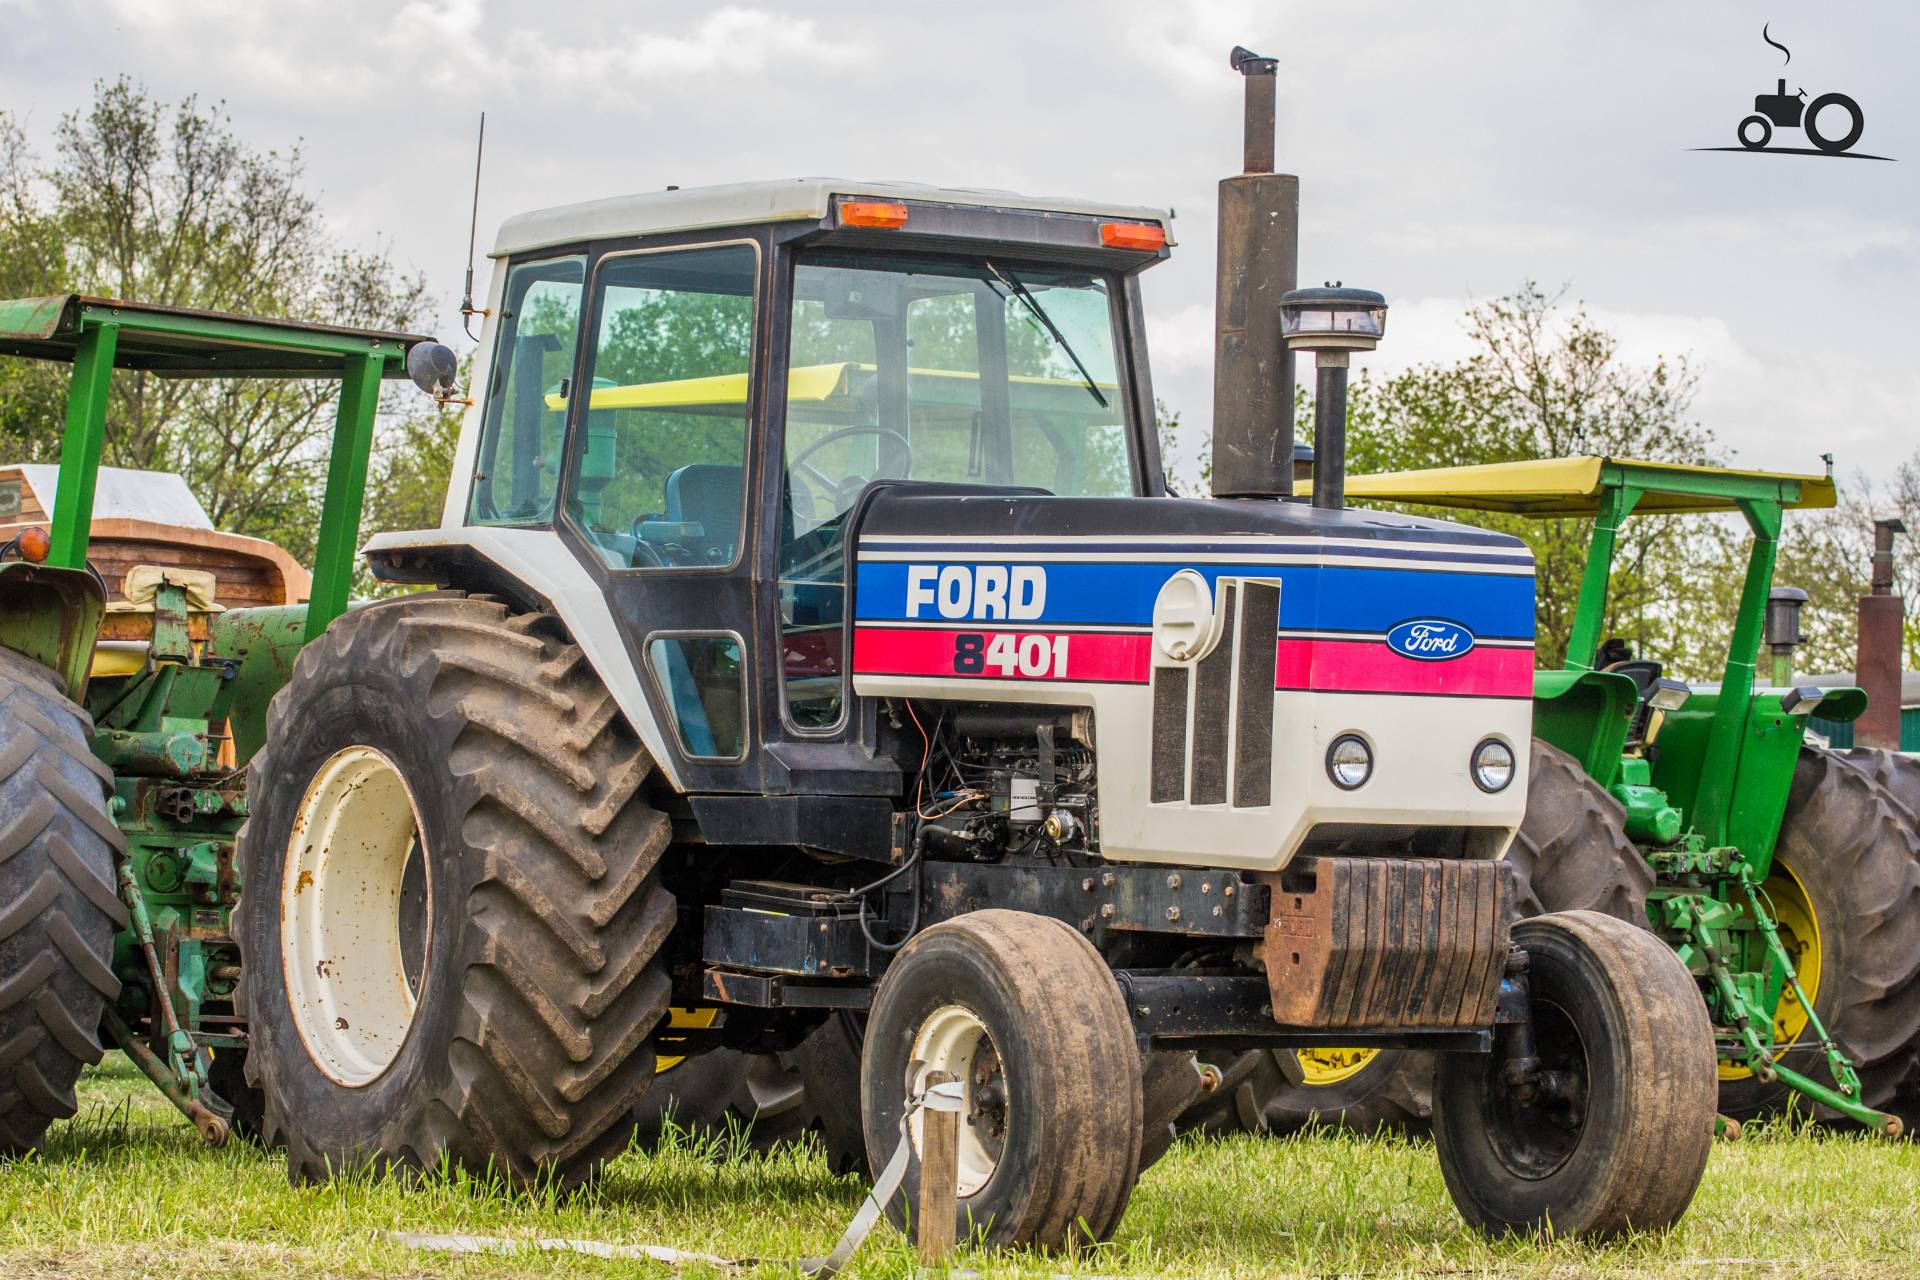 Ford 8401 #840207